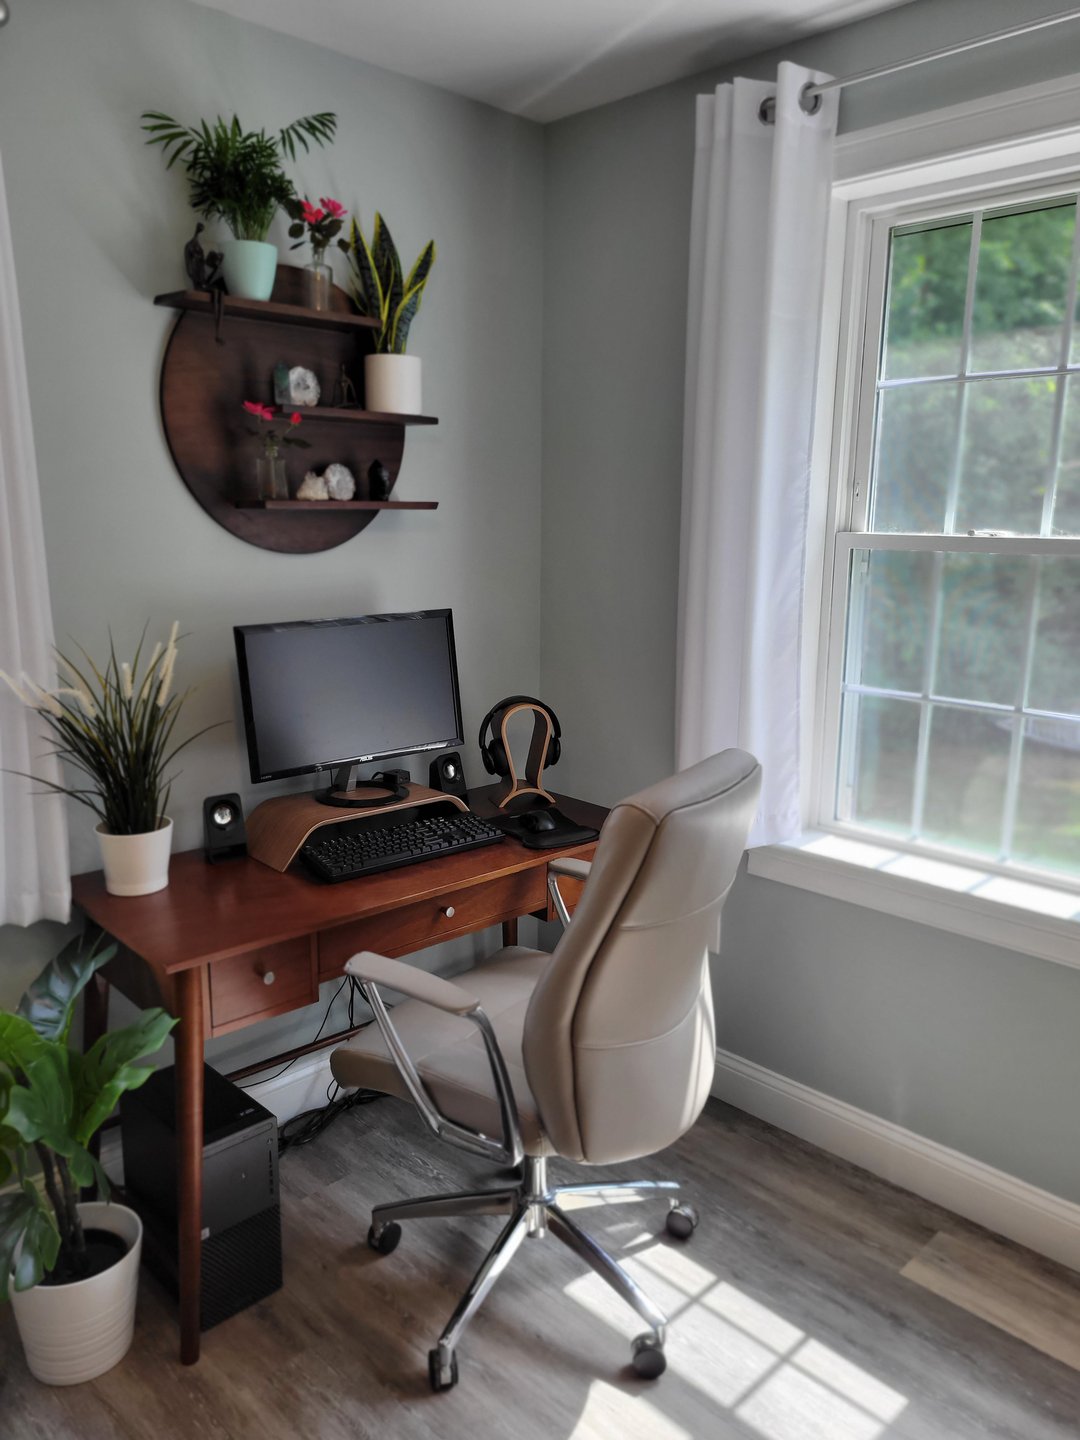 This photograph shows the author's desk next to a window. Everything is clean and simple. The gray walls, white curtains, and a few potted plants give an air of calm and peace.